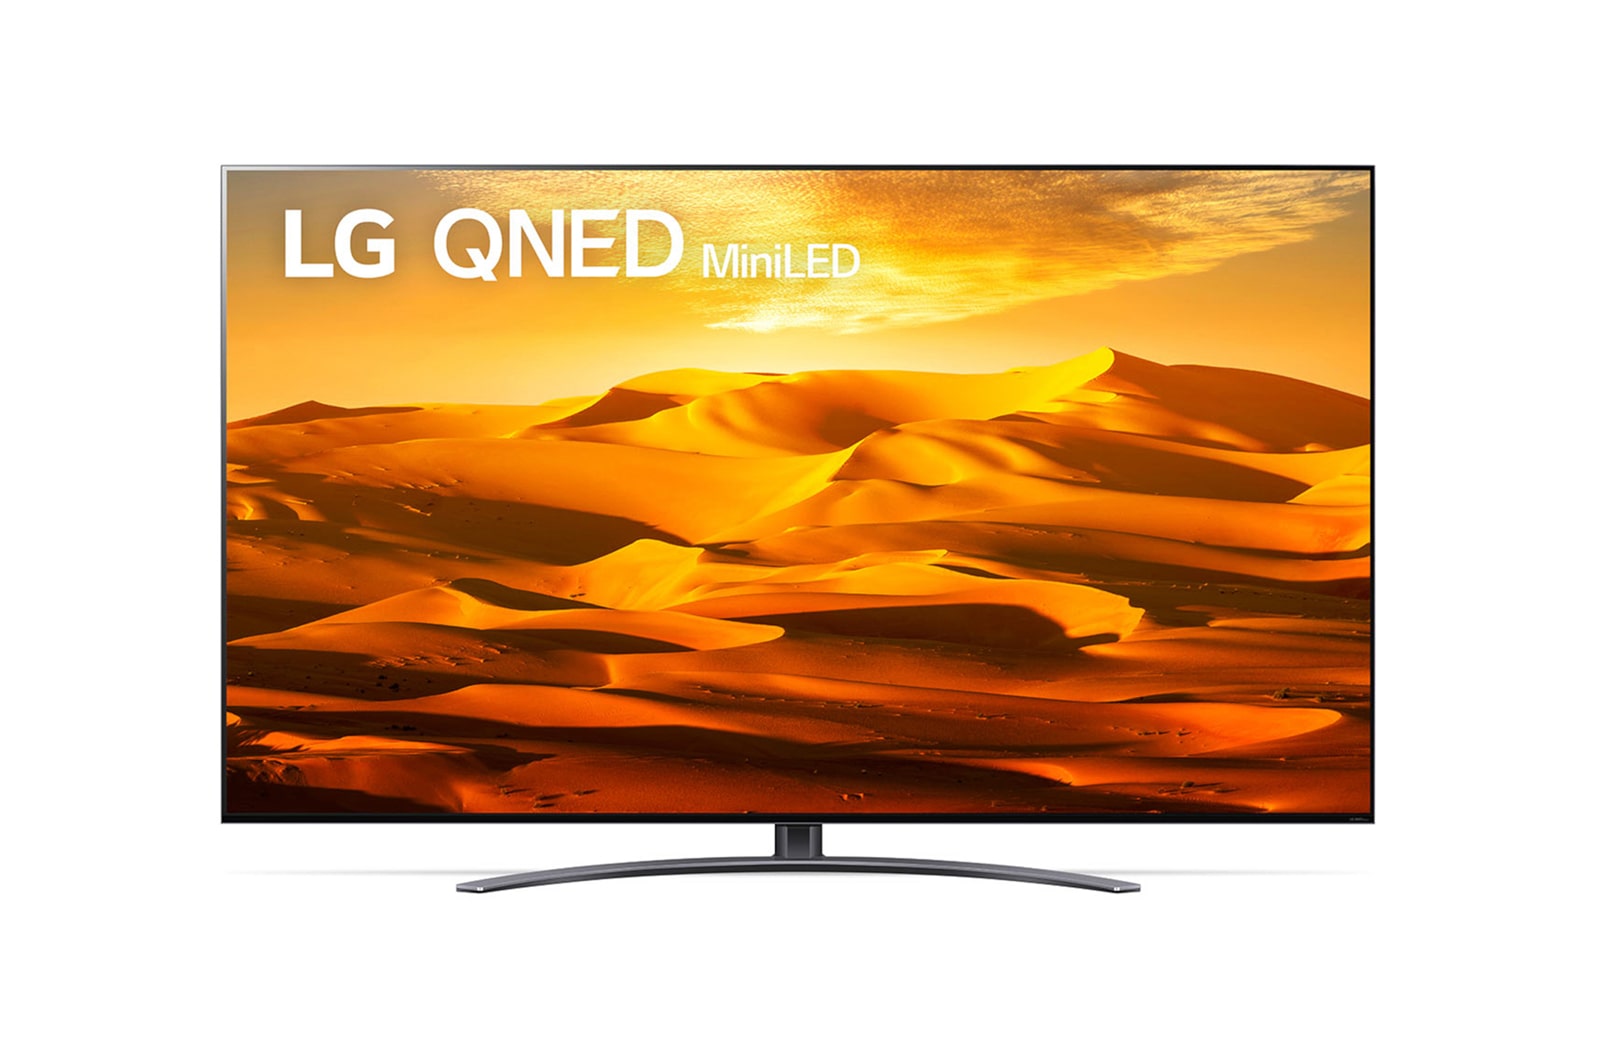 LG QNED MiniLed | TV 86'' Serie QNED91 | QNED 4K, Smart TV, VRR, Dolby Vision IQ e Atmos, 86QNED916QE